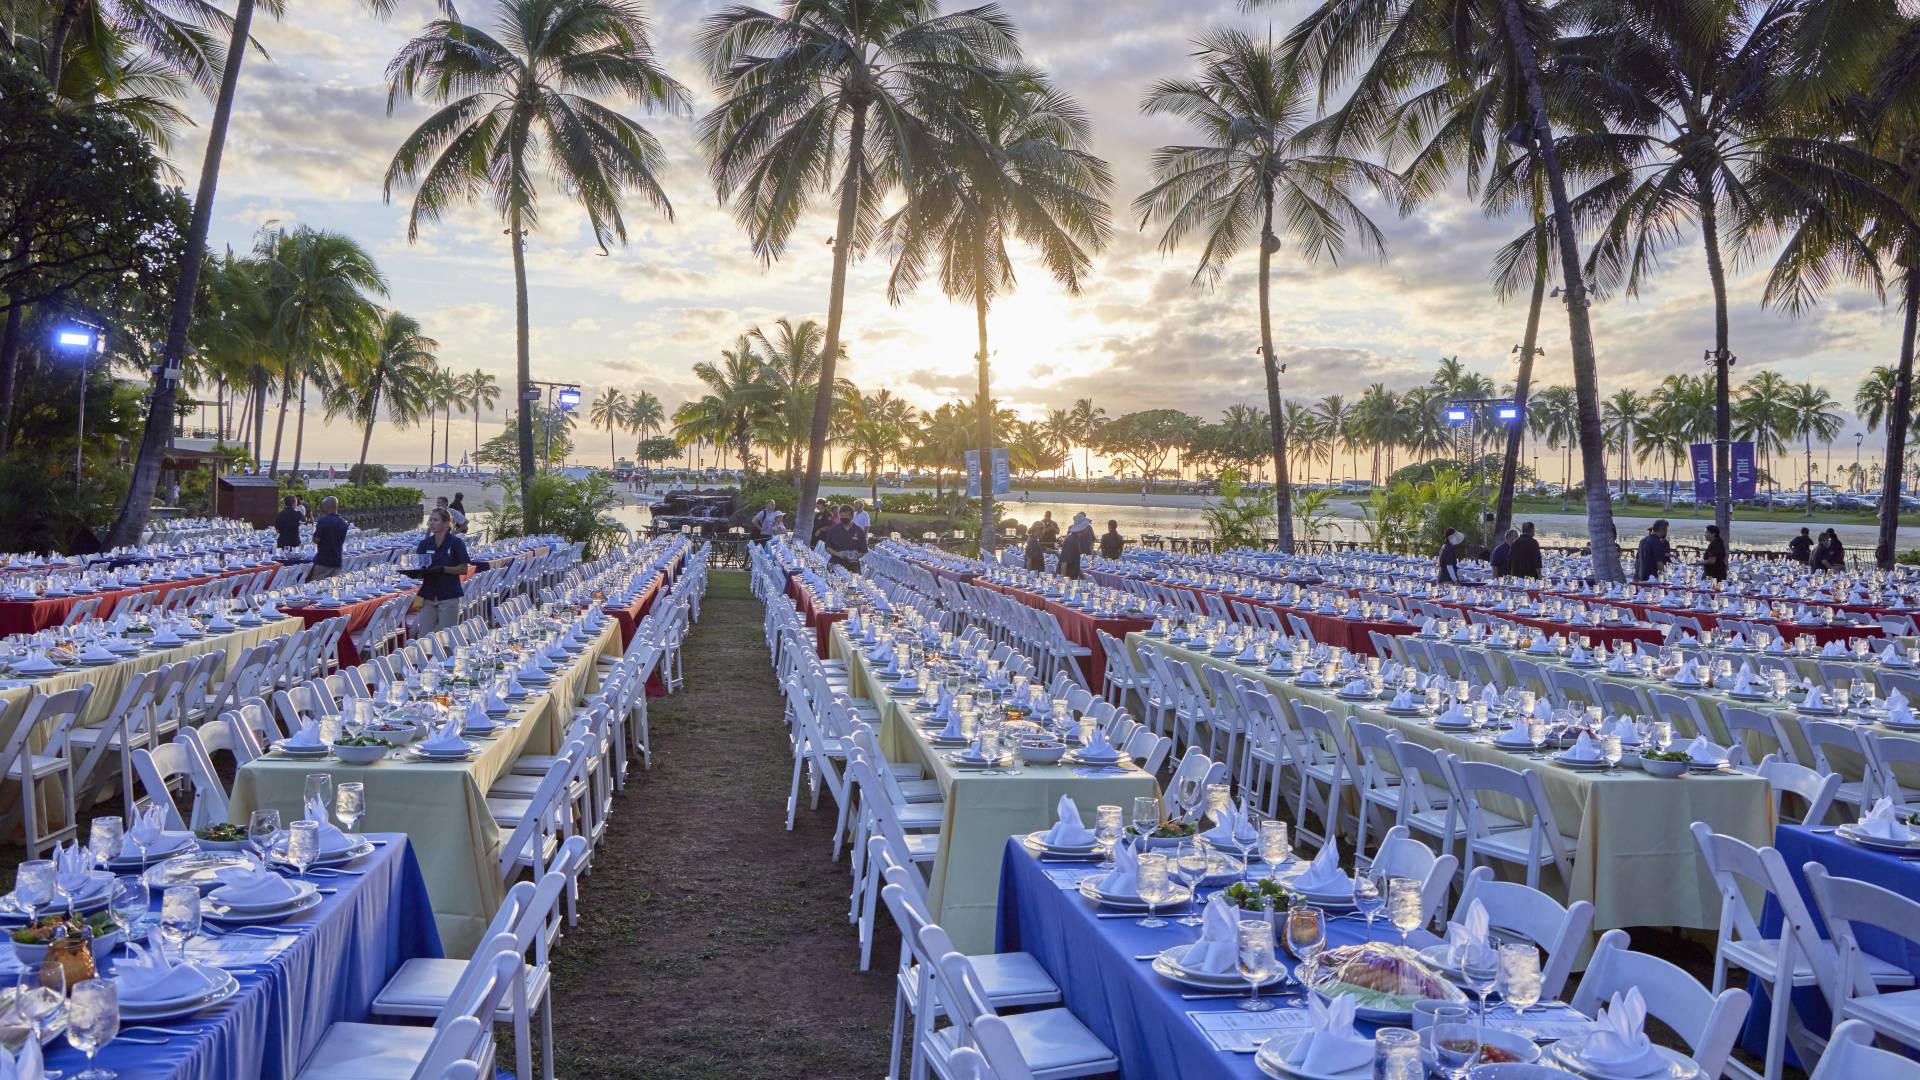 Outdoor Dining Event Celebration